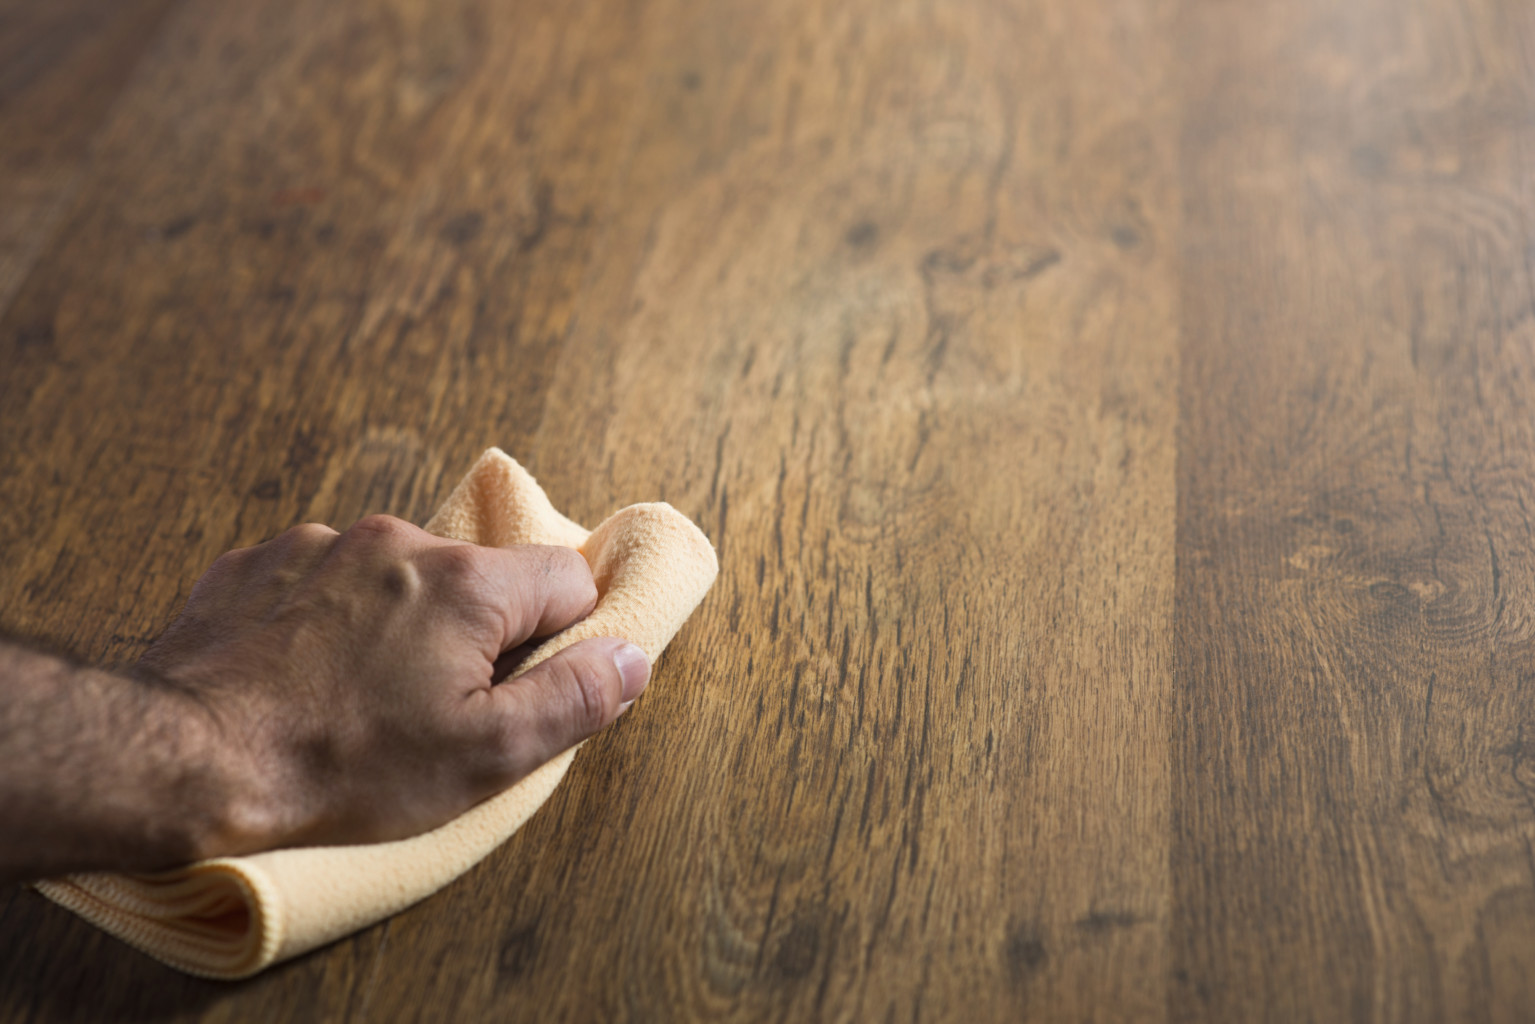 It's easy to touch up a hardwood floor with a natural oil finish